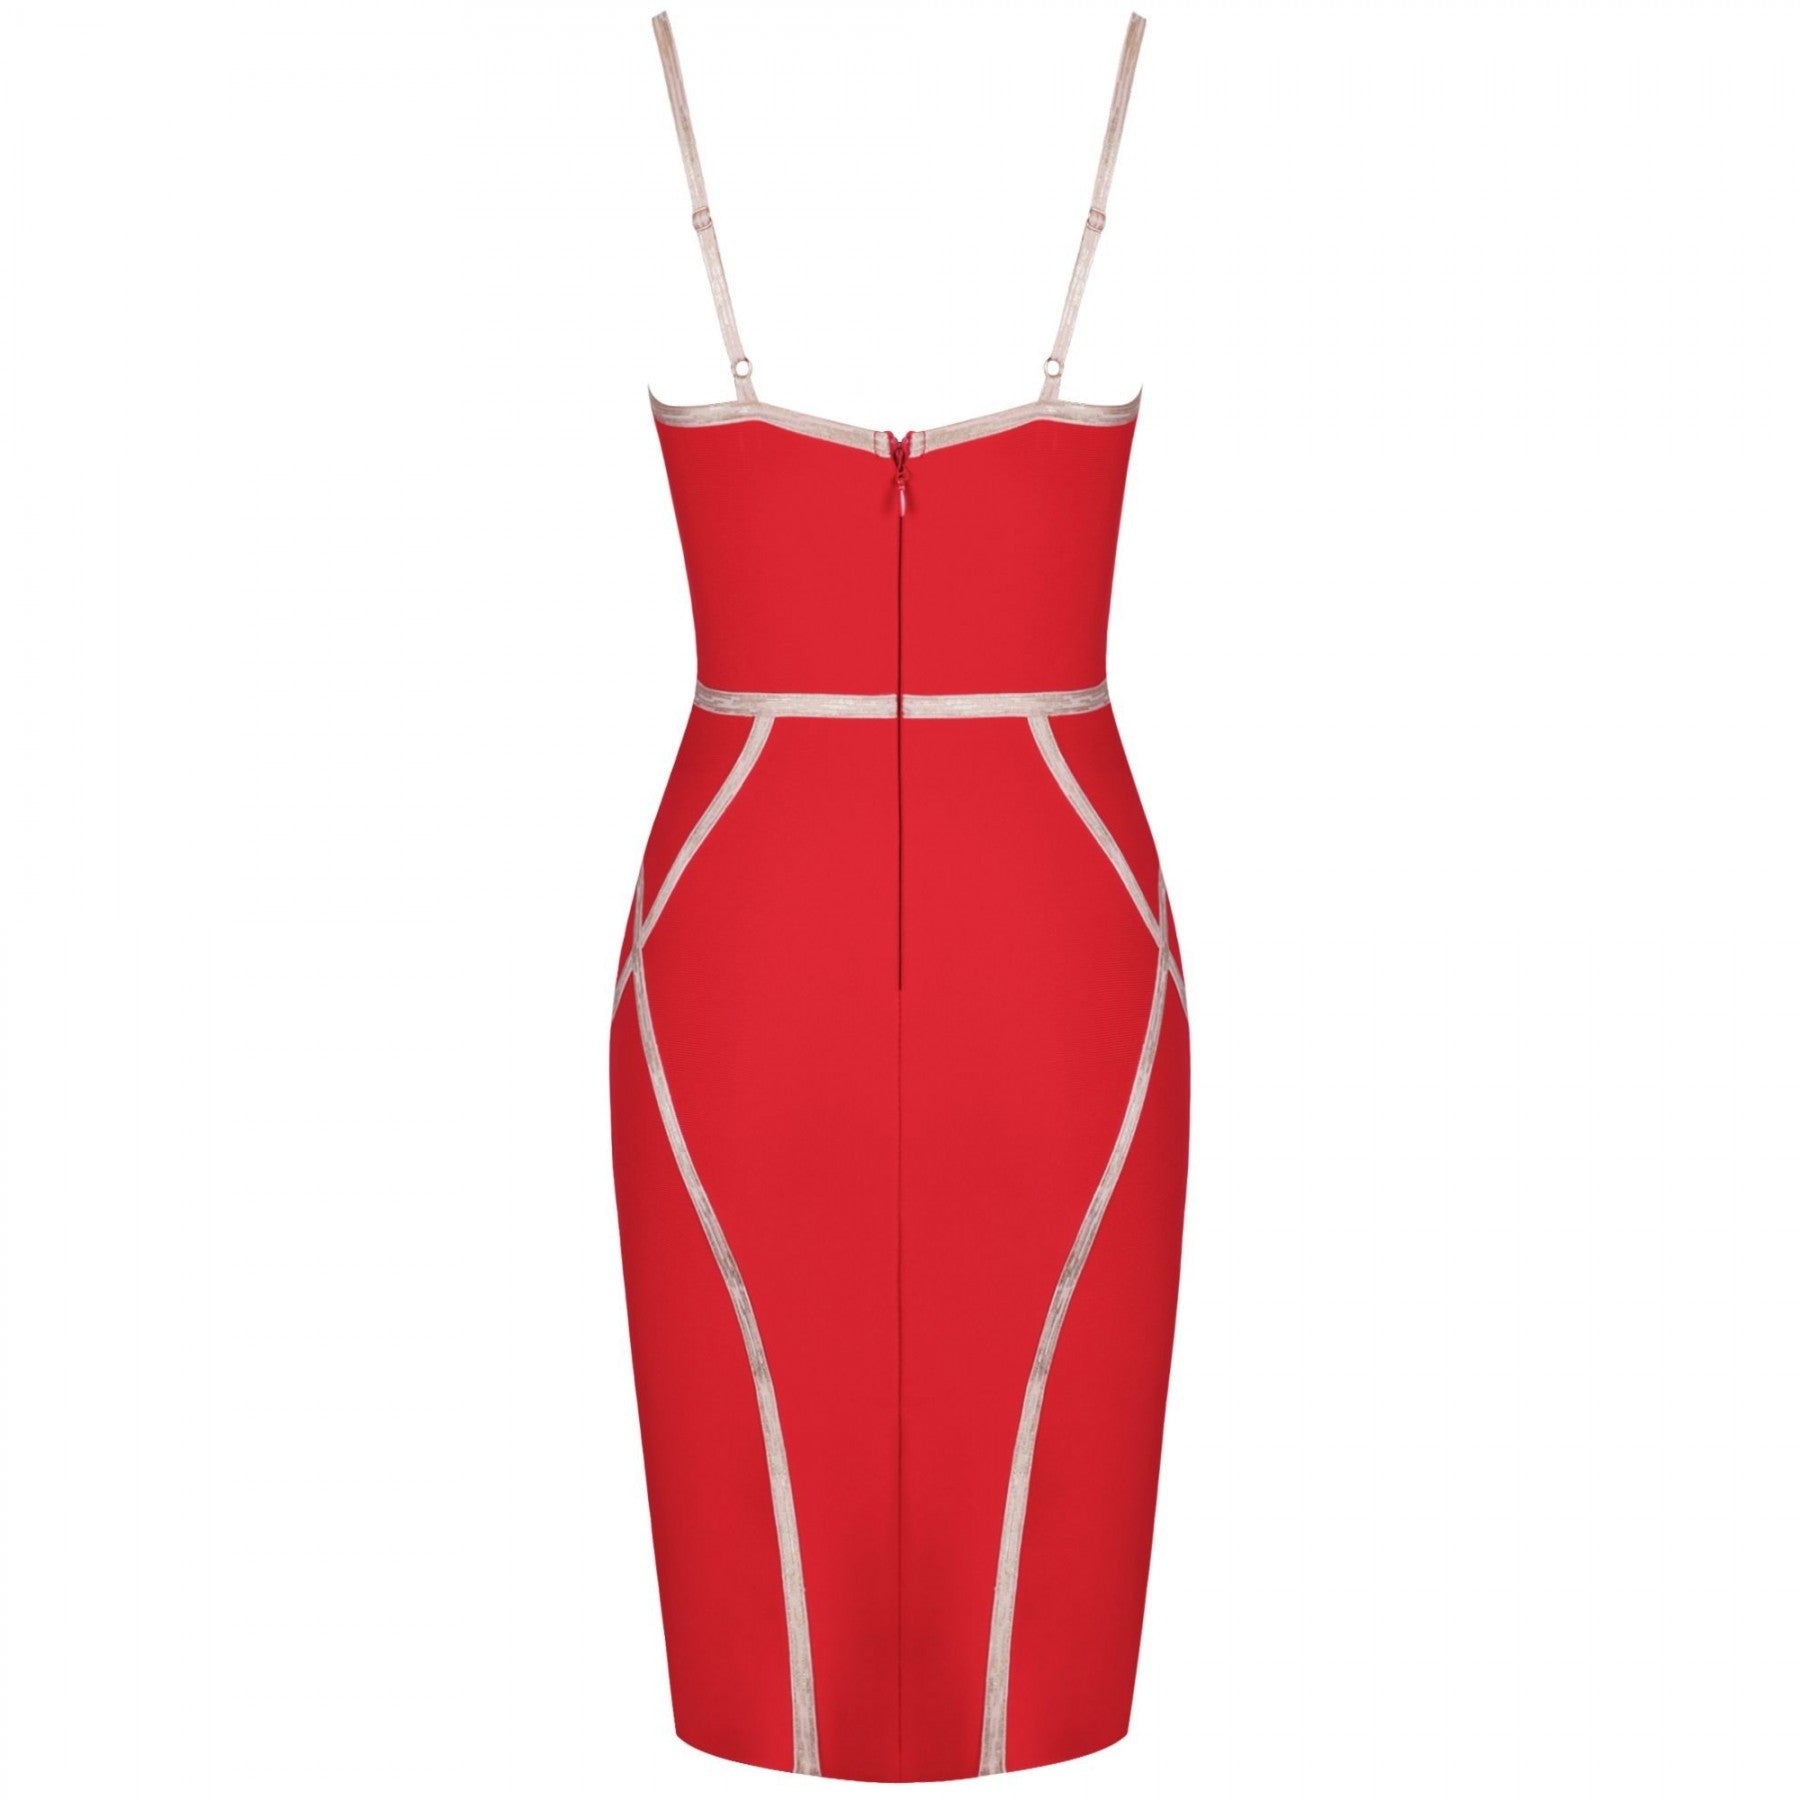 Strappy Sleeveless Striped Over Knee Bandage Dress PP19131 9 in wolddress